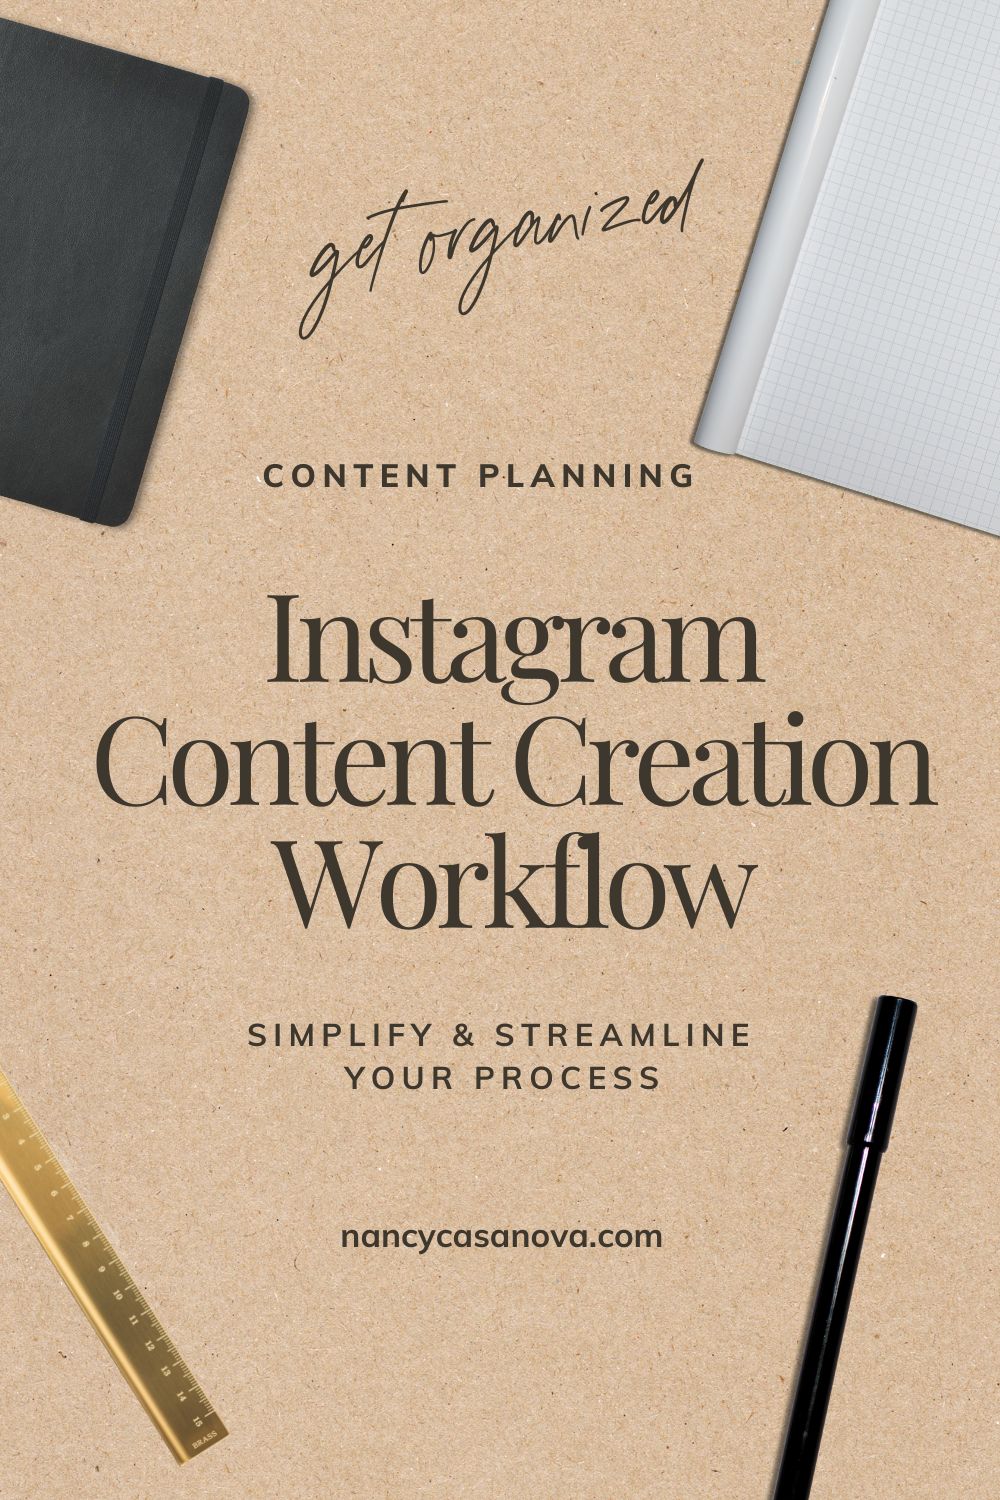 Say goodbye to feeling scattered about what to post on Instagram, from choosing an image to writing a caption, this five-step process really takes away all of the stress and overthinking of curating your Instagram. Download this Ultimate 1 Hour Instagram Workflow to feel focused and stress-free about creating and posting on Instagram. 